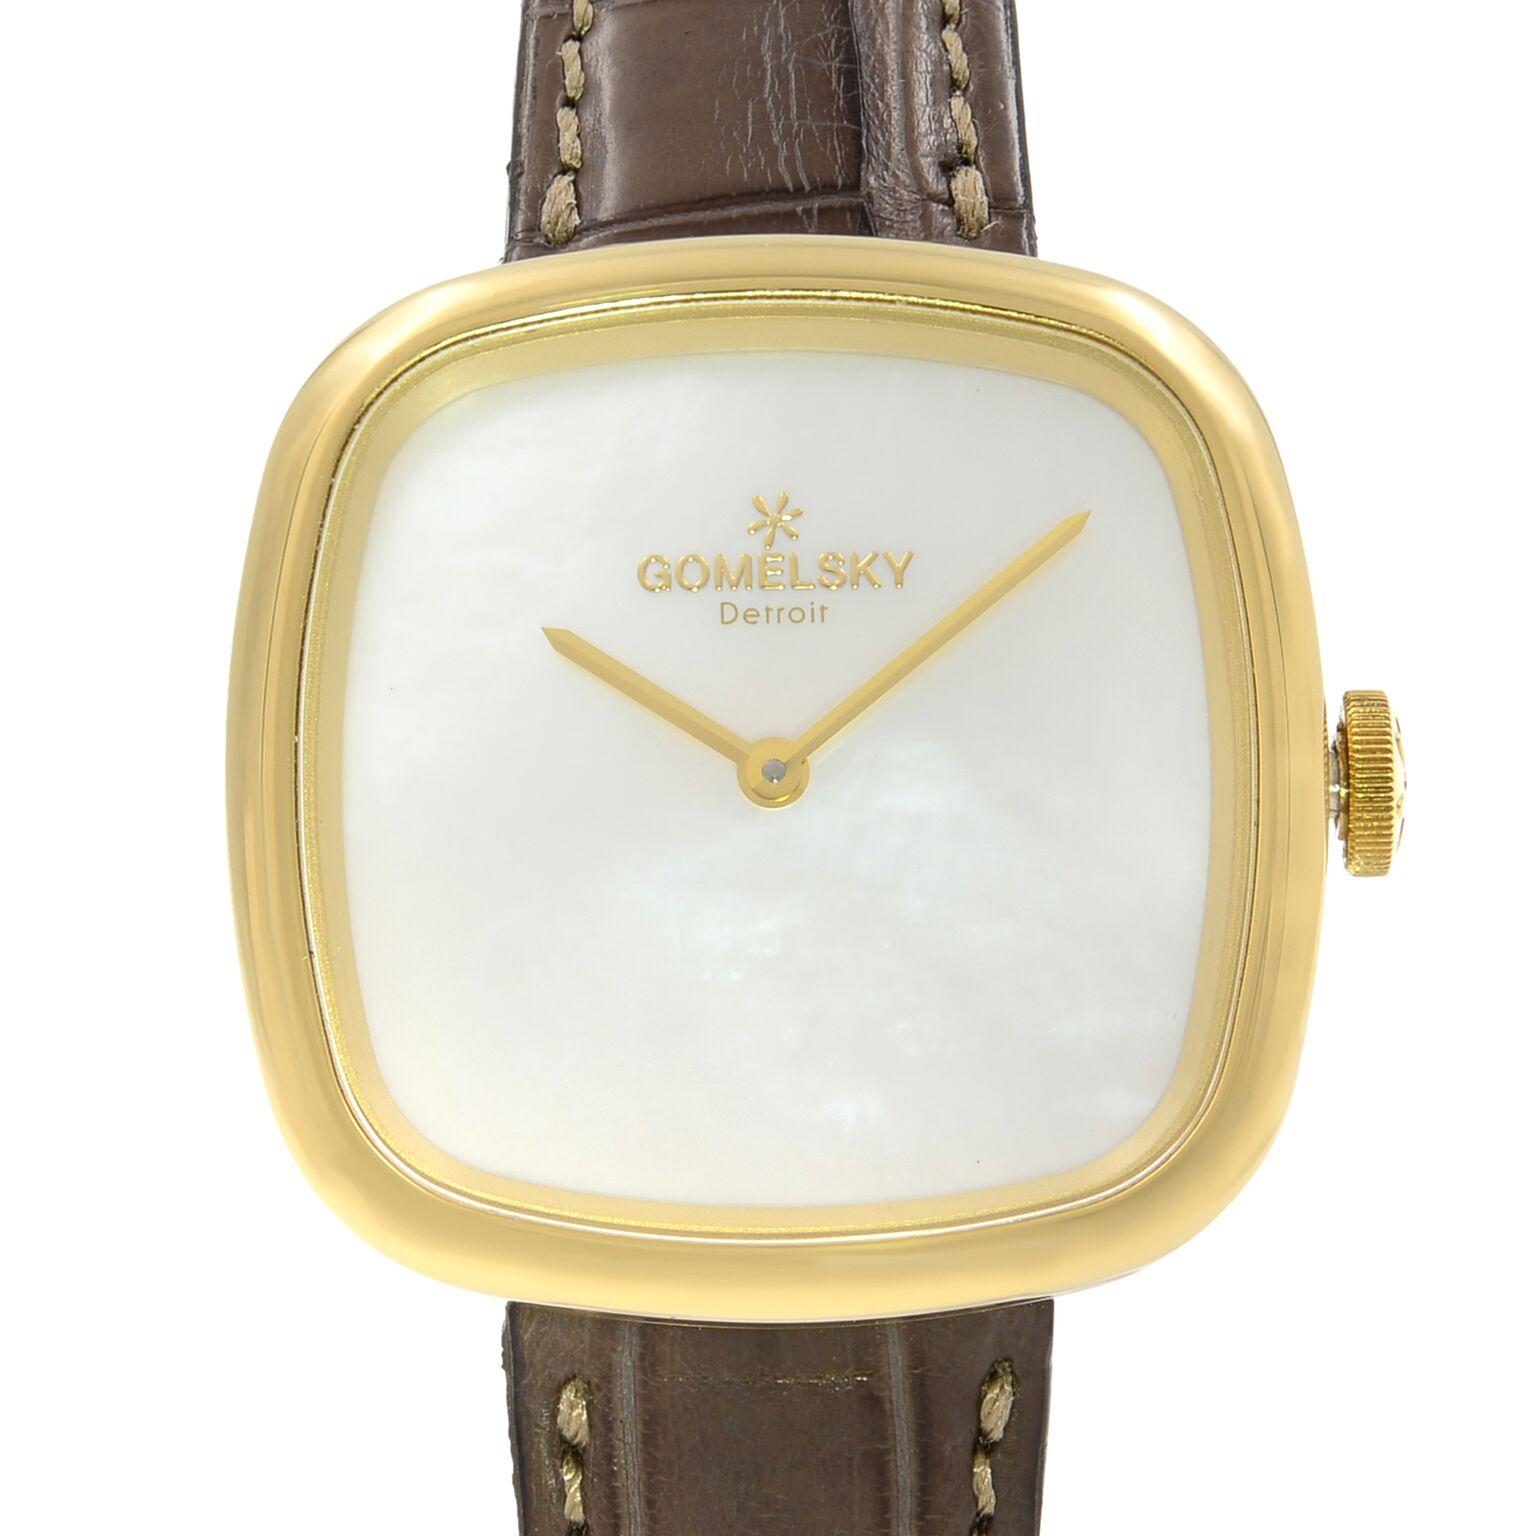 This brand new Gomelsky  Eppie Sneed  G0120072881 is a beautiful Ladies timepiece that is powered by a quartz movement which is cased in a stainless steel case. It has a square shape face,  dial, and has hand unspecified style markers. It is